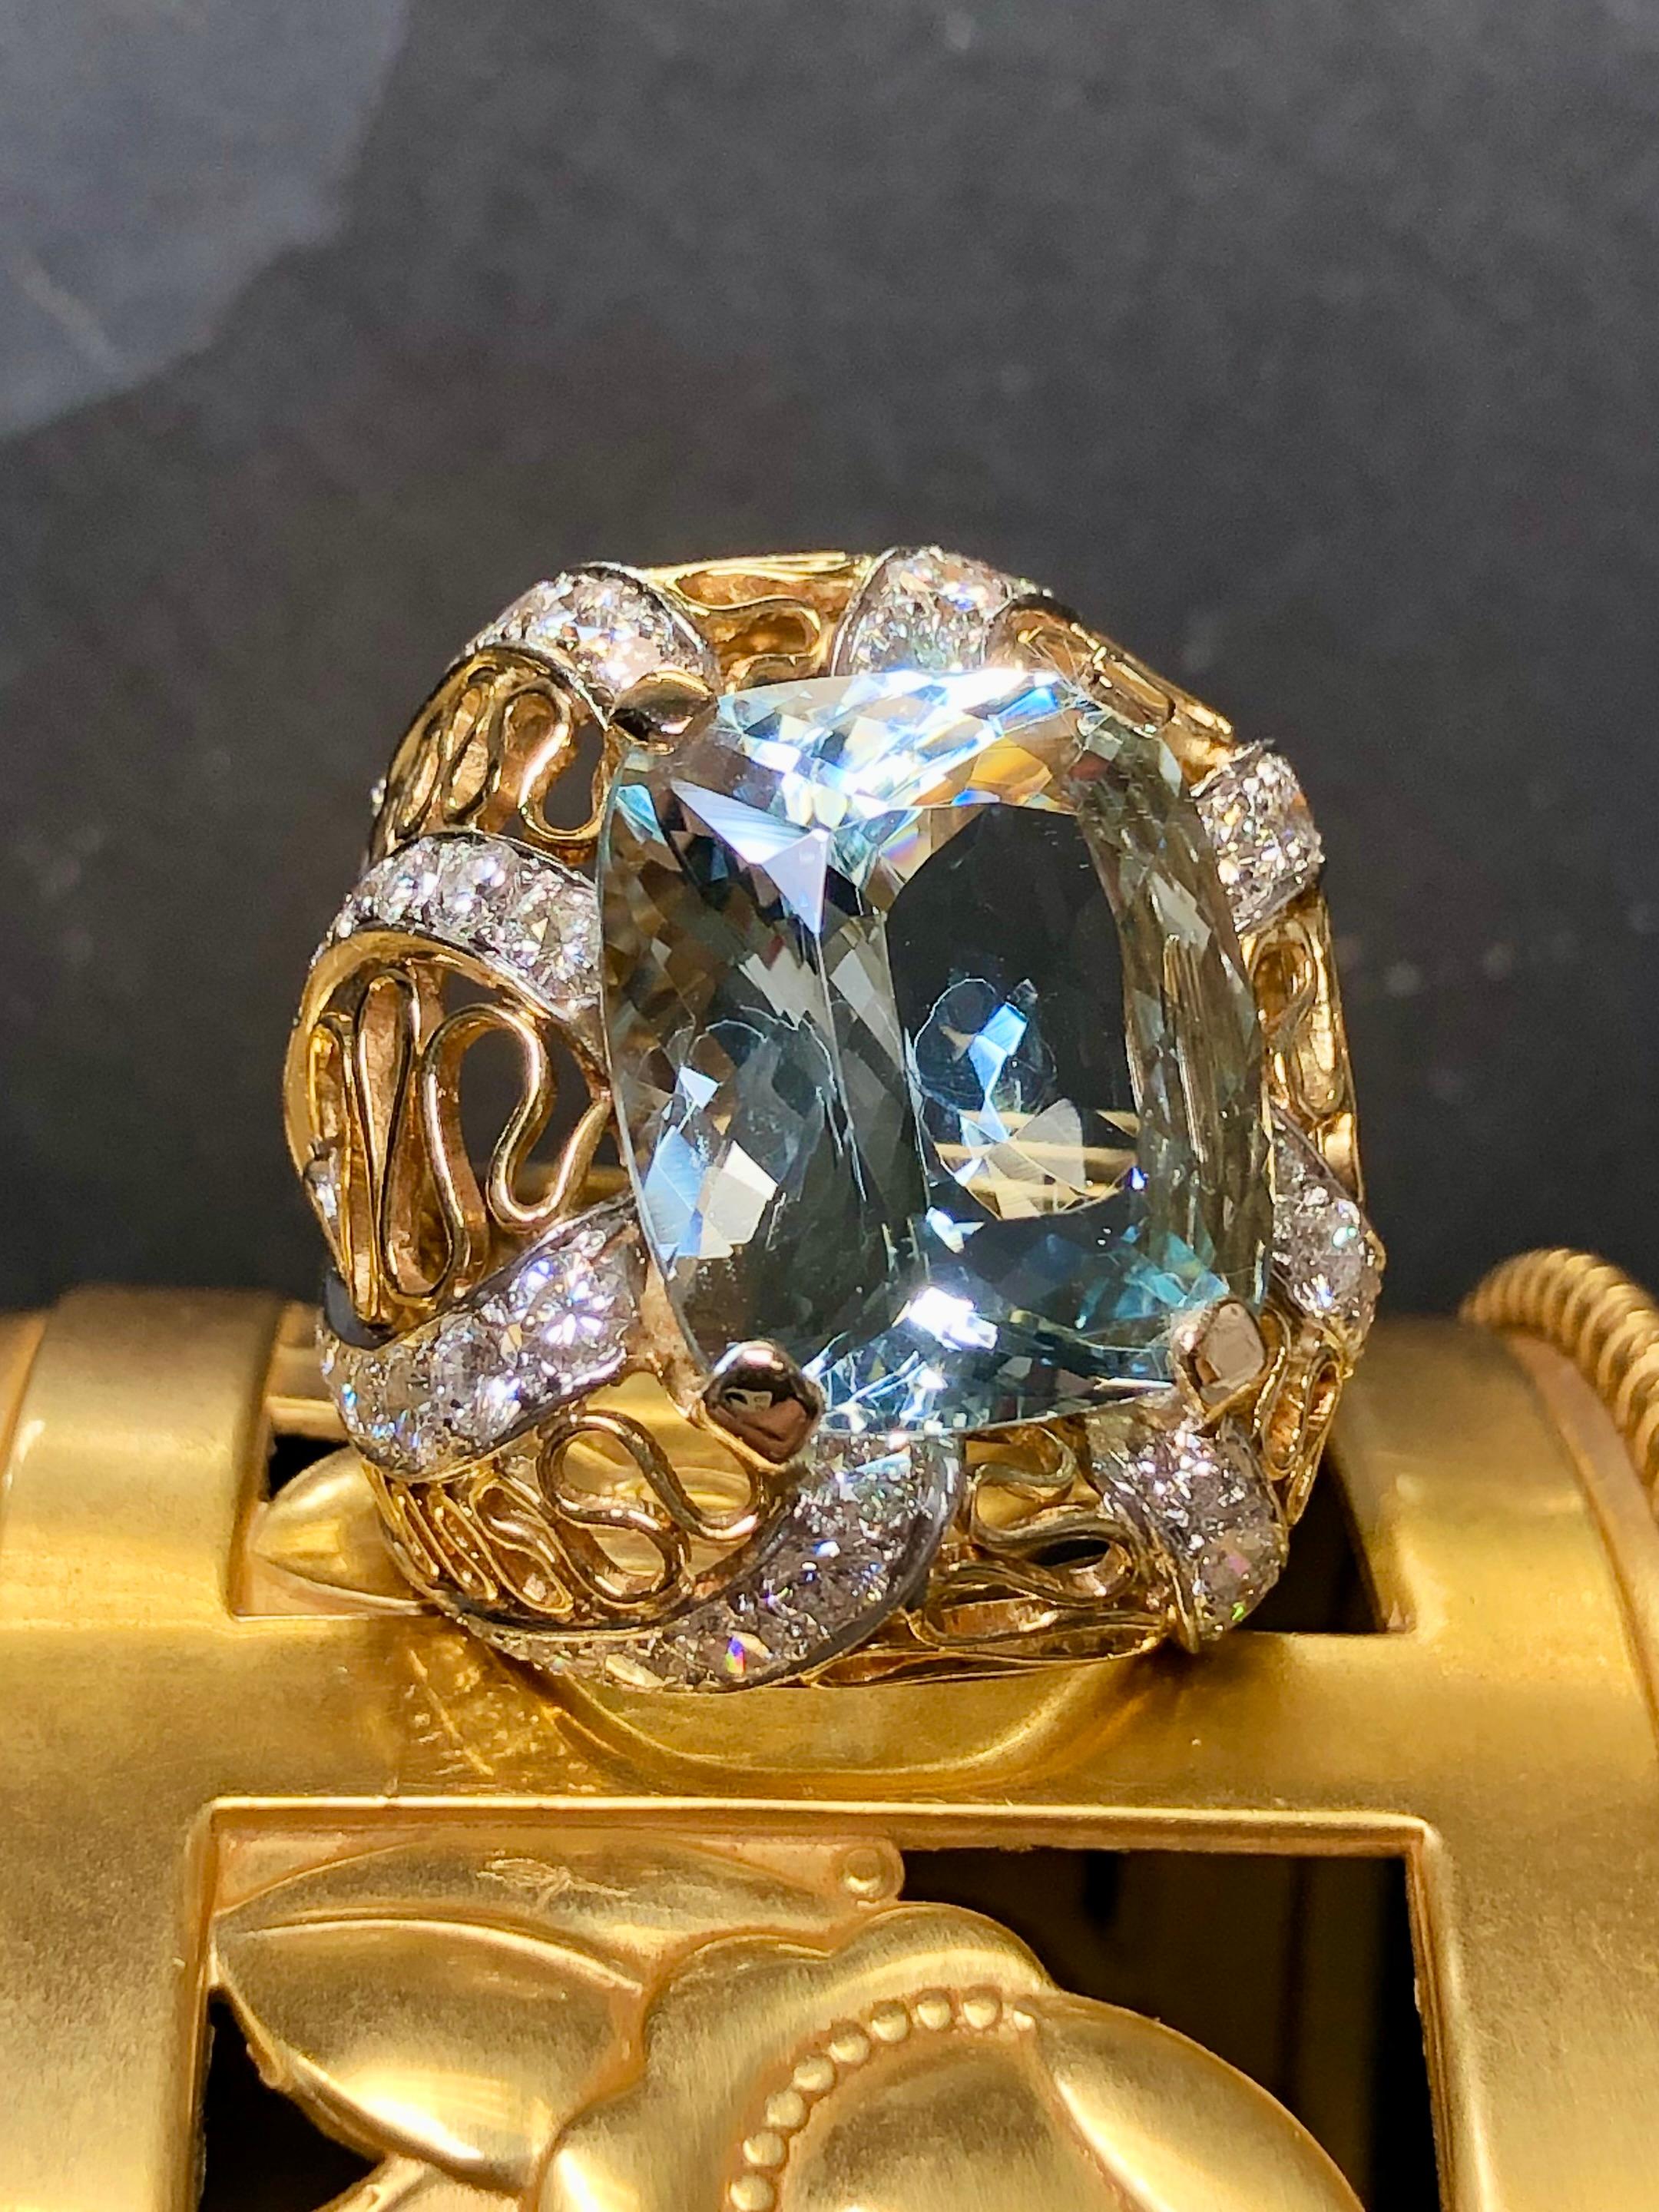 Now this ring is fabulously made. It is done in 18K yellow and white gold and centered by an approximately 20ct cushion cut aquamarine (17.82x15.58x10.18). Bead set down all sides of the ring are incredibly well matched collection quality diamonds